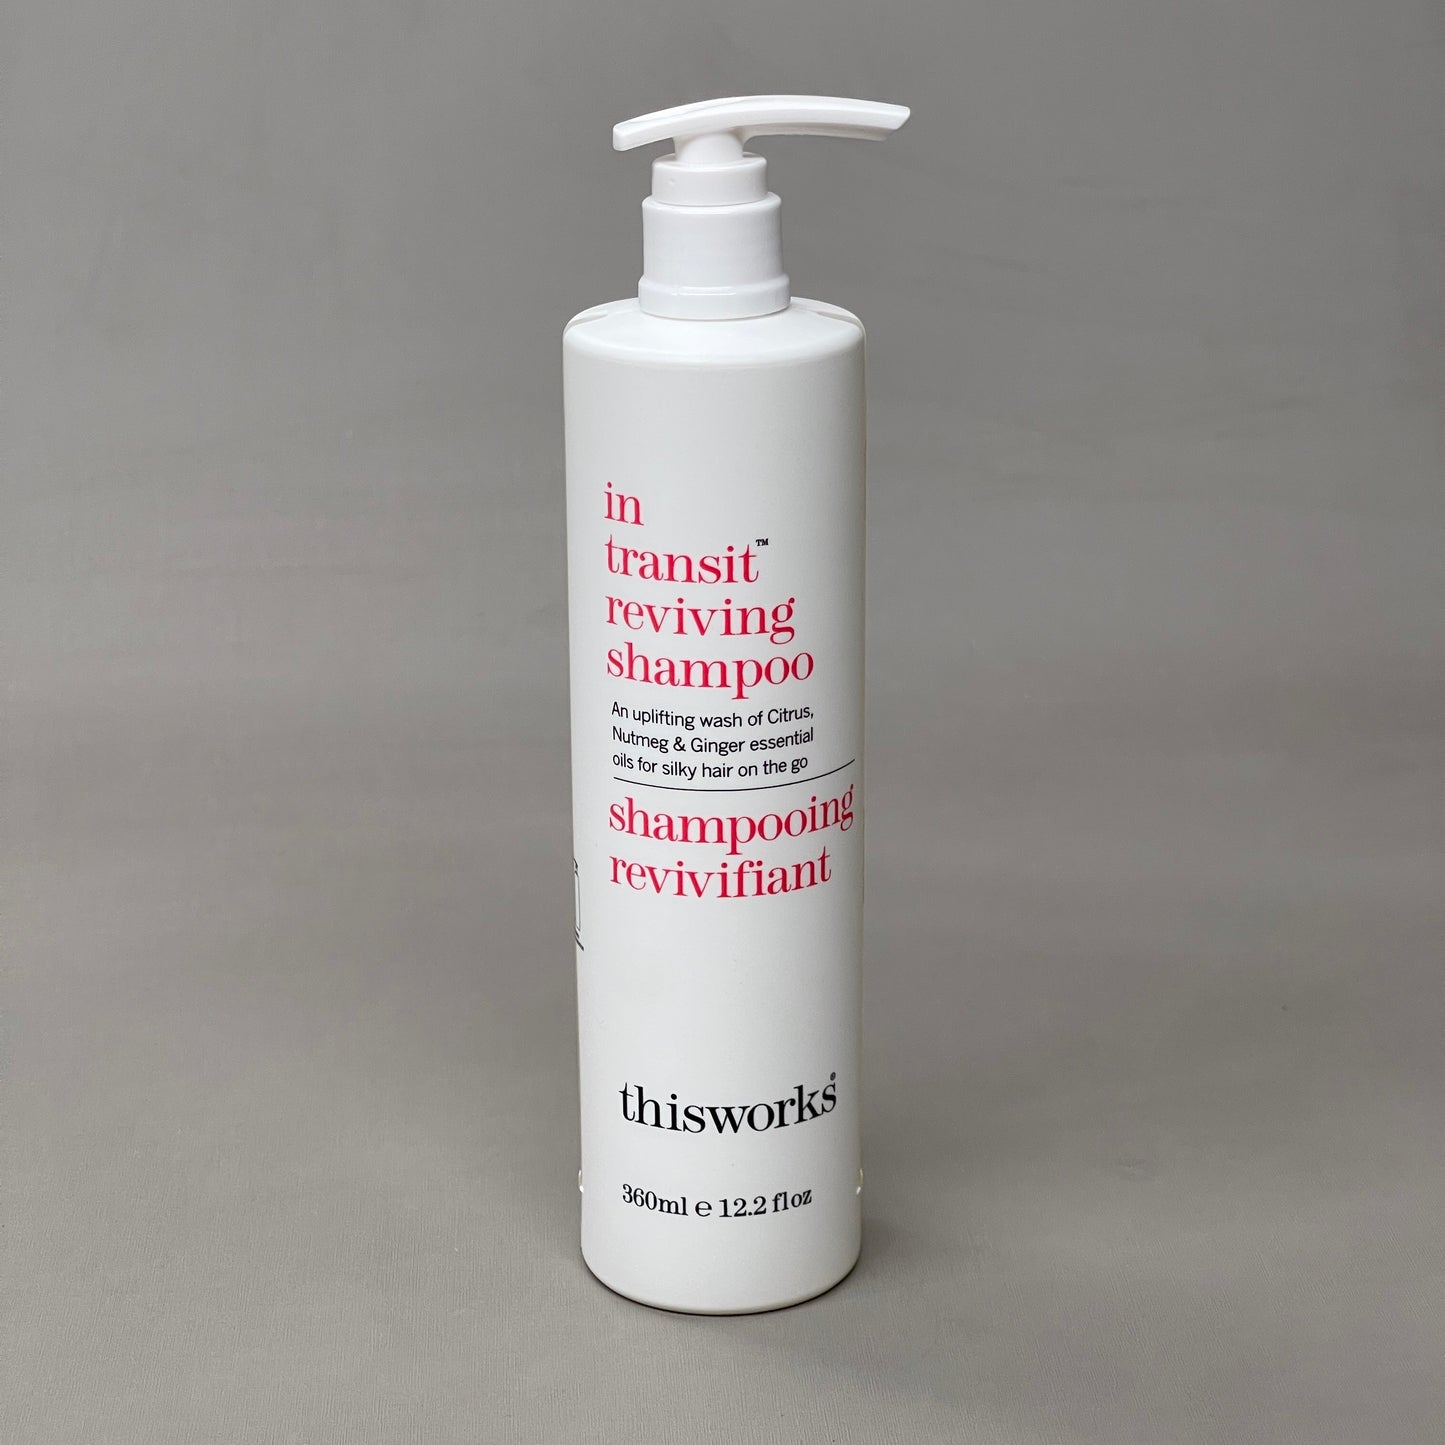 GILCHRIST & SOAMES 3 Pack Of THISWORKS In Transit Reviving Shampoo 12.2 Fl Oz (New)